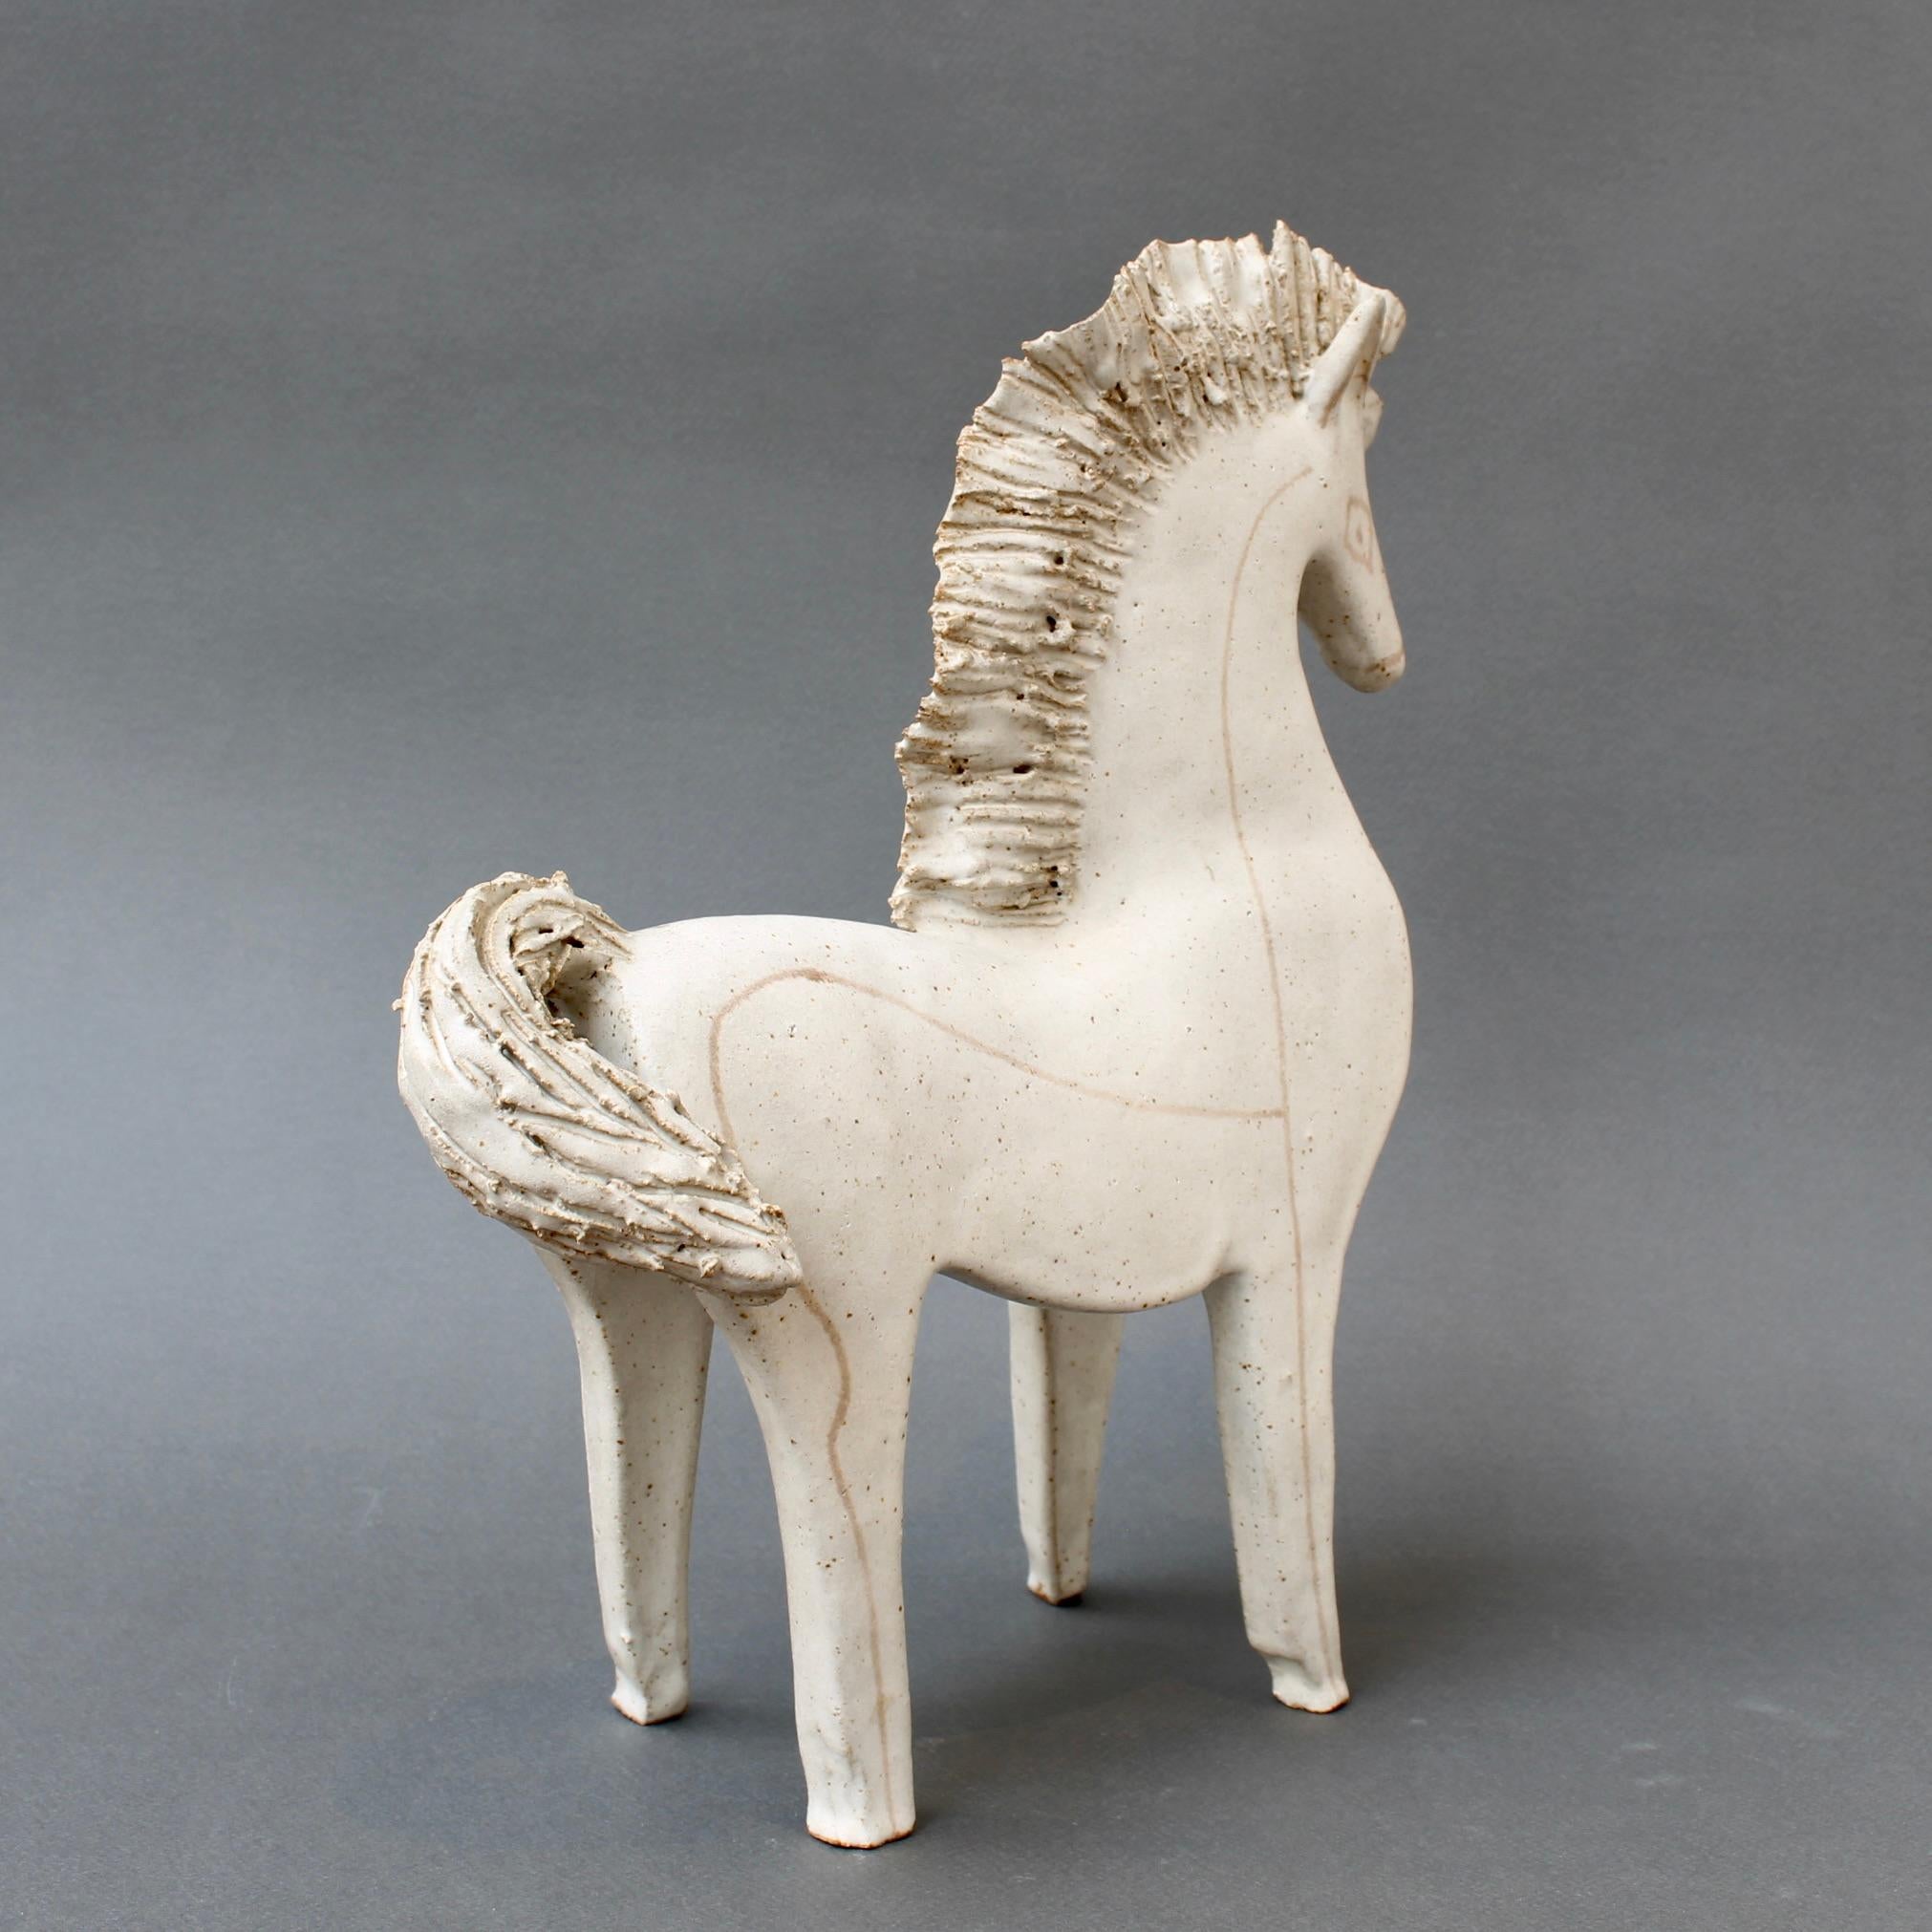 Vintage Ceramic Horse by Bruno Gambone (circa 1970s) - Large For Sale 2